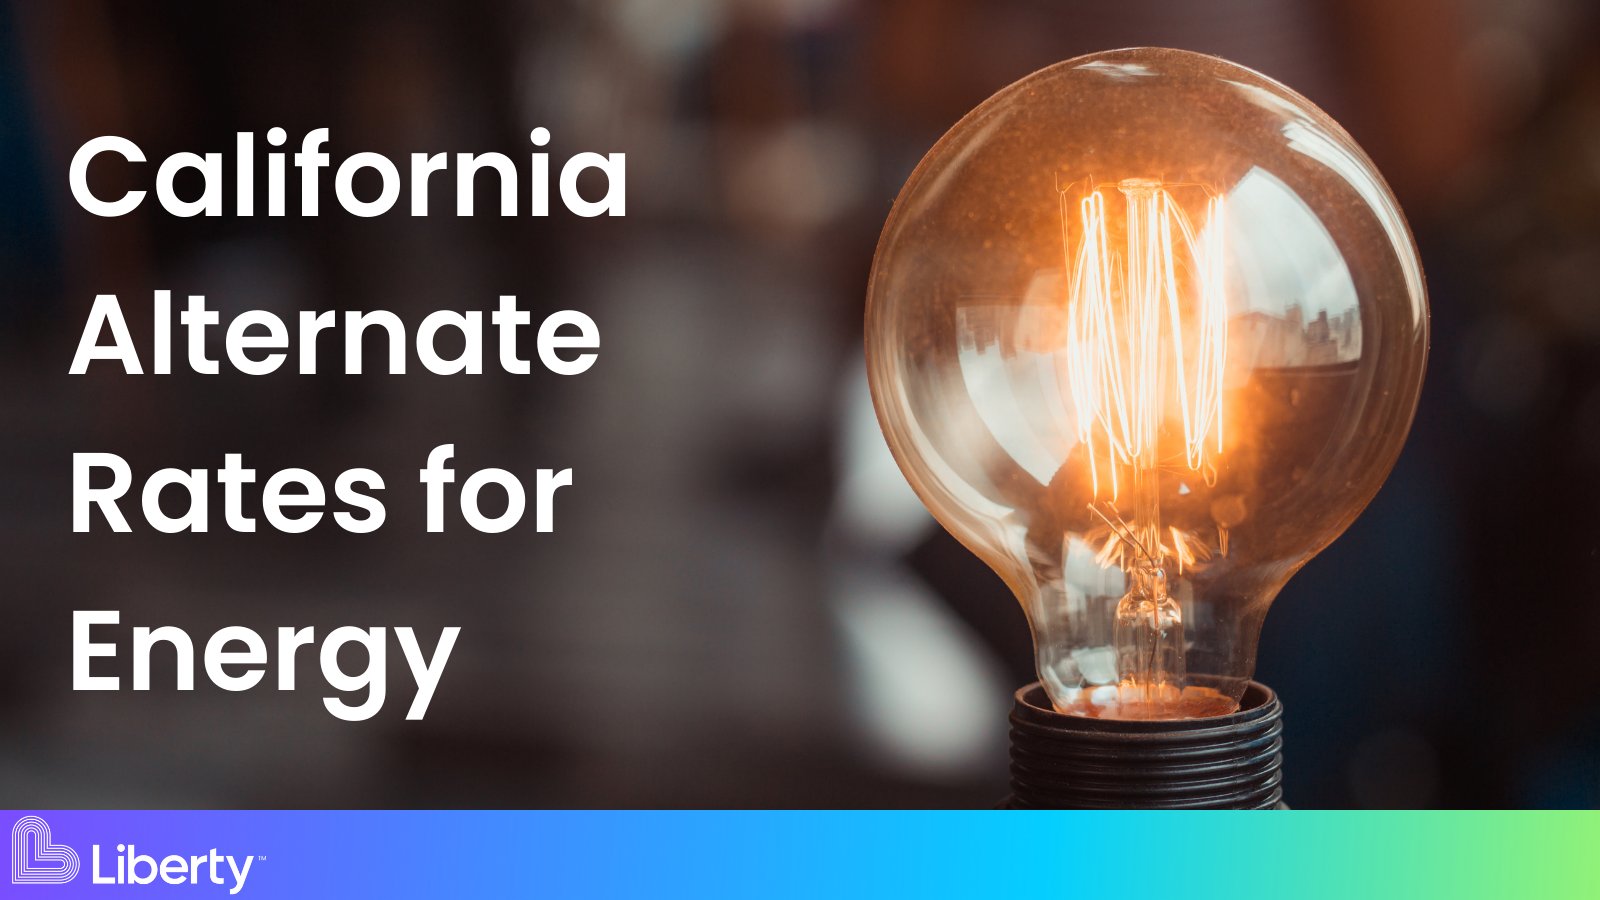 Utilities Lake Tahoe on Twitter: "#DYK the California Alternate Rates for Energy (CARE) Program income-qualified customers a discount their electric bill? Please visit our website to find out if